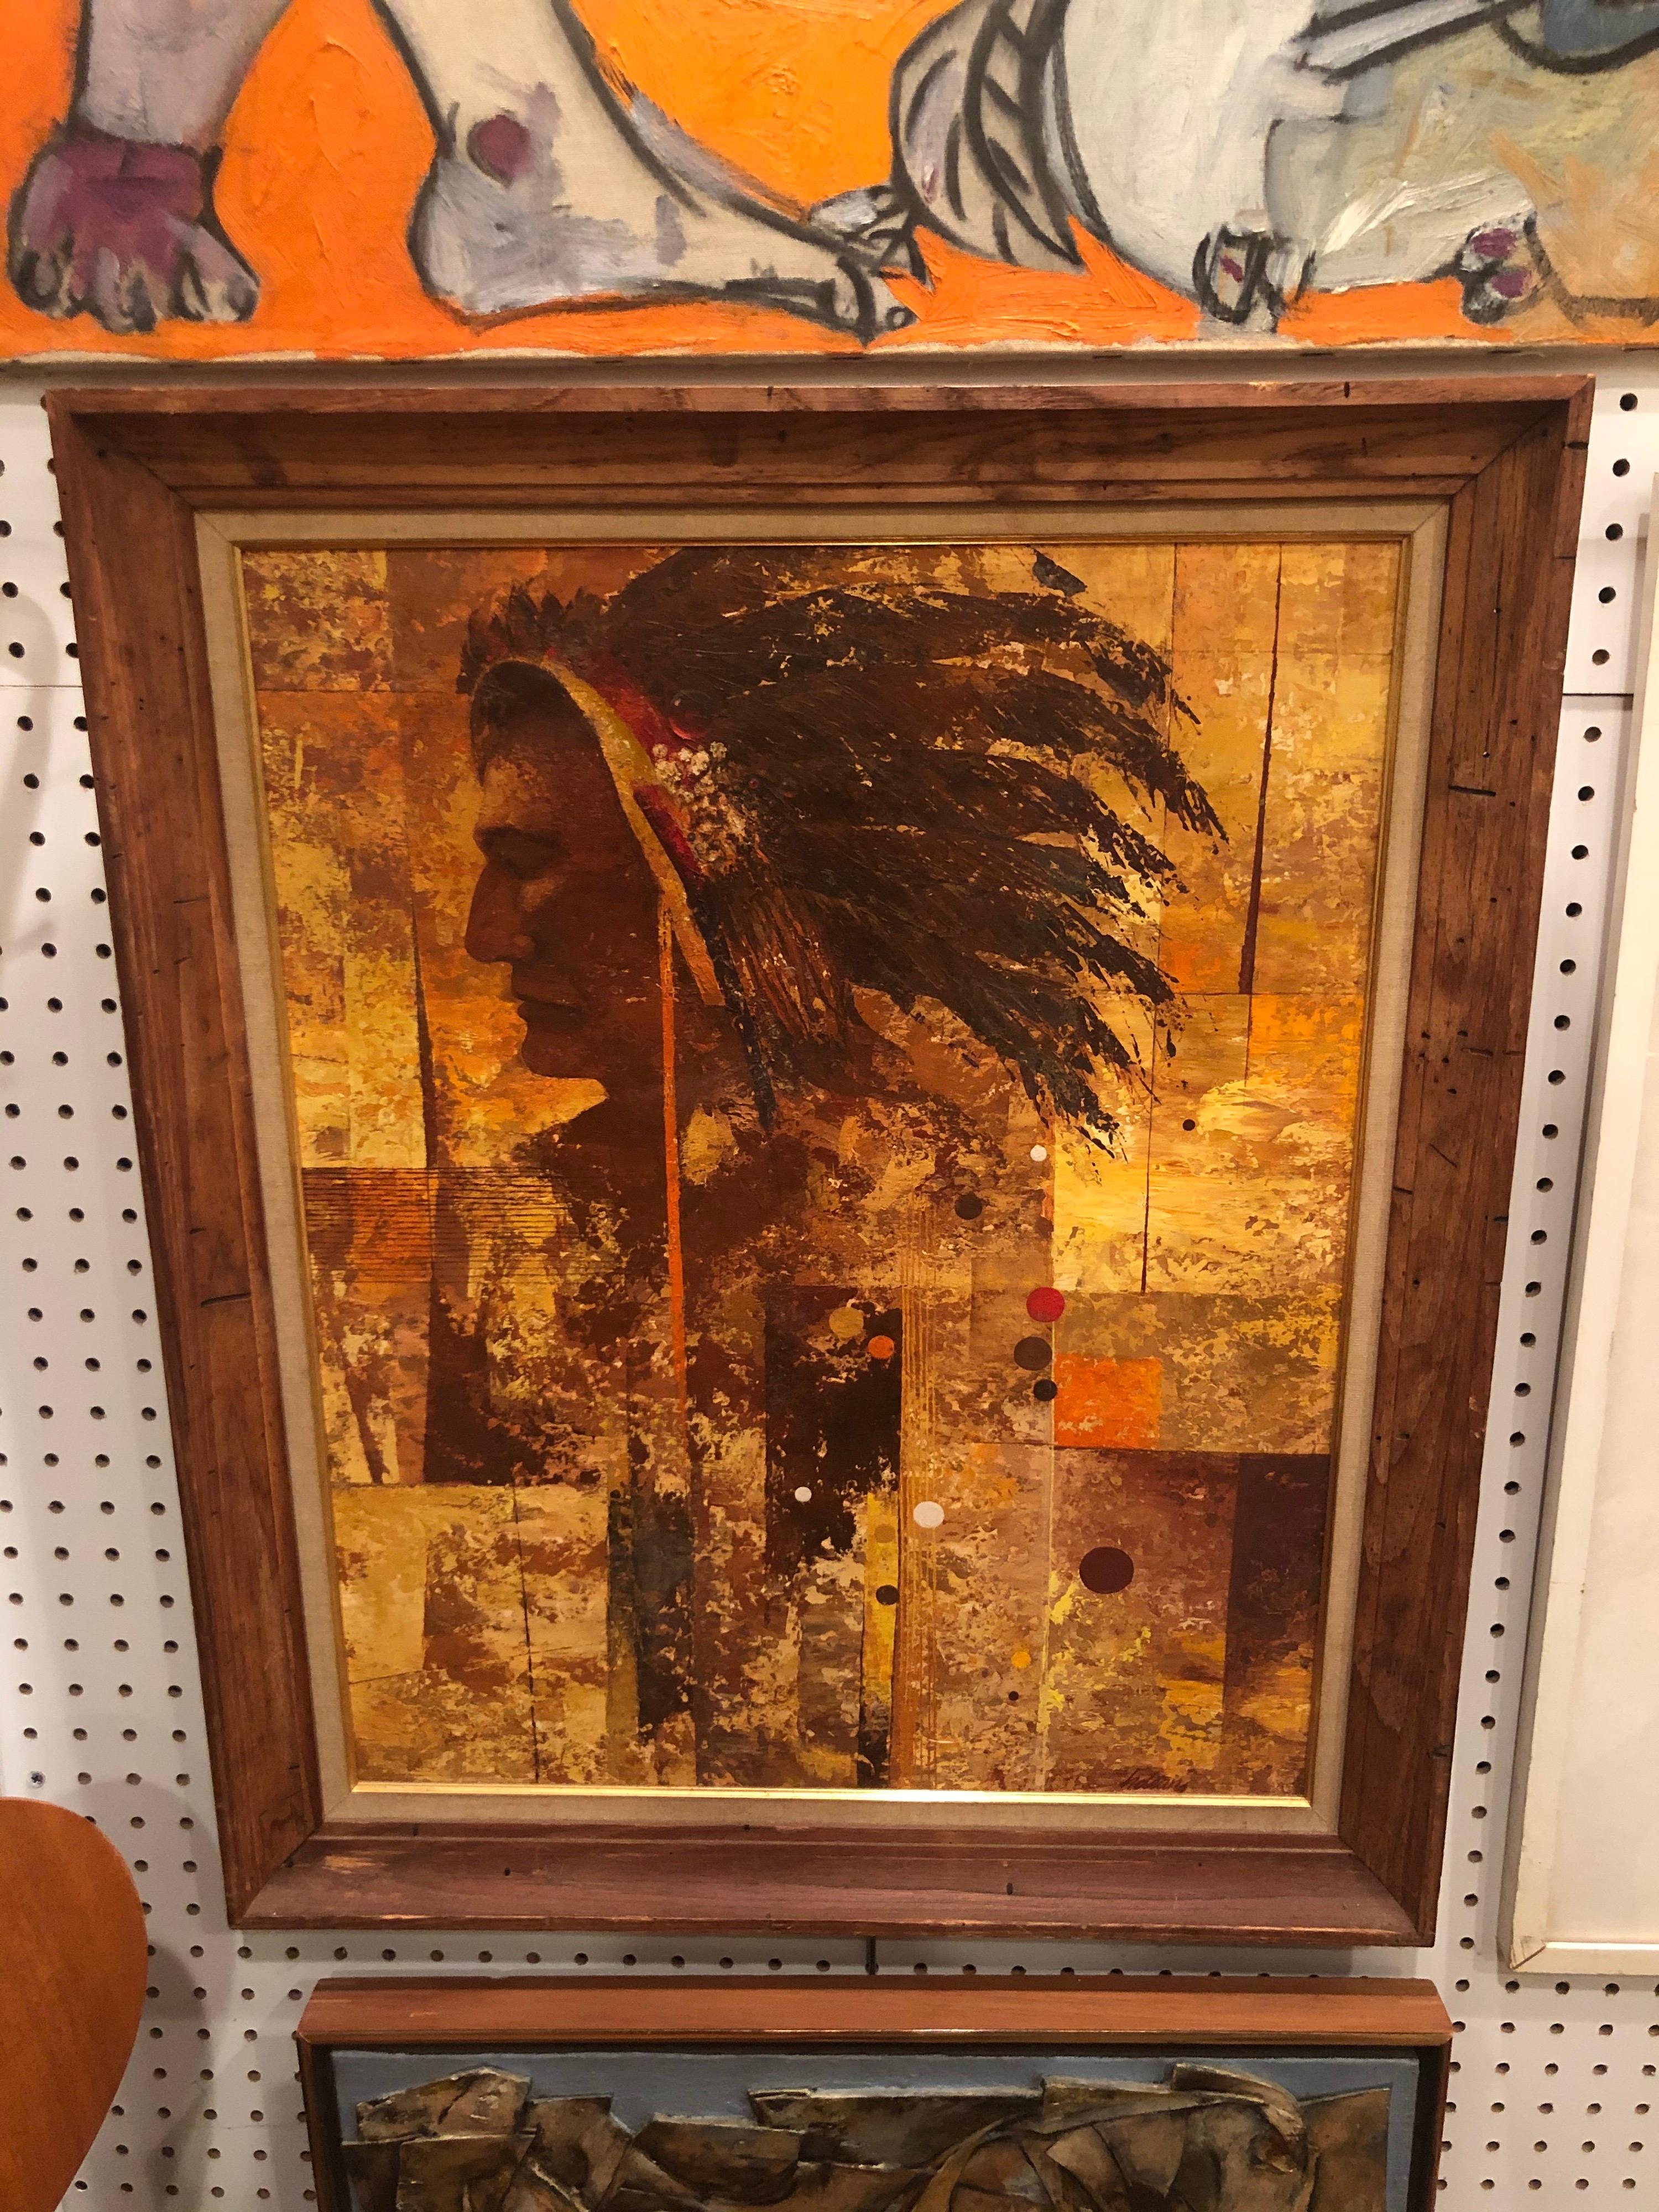 Mid Century oil on board of an American Indian. Nice heavy impasto style. In a wooden wormhole styled fame. Will fit in with any Arts & Crafts or ranch style décor. Signature illegible but may be H. Deans.